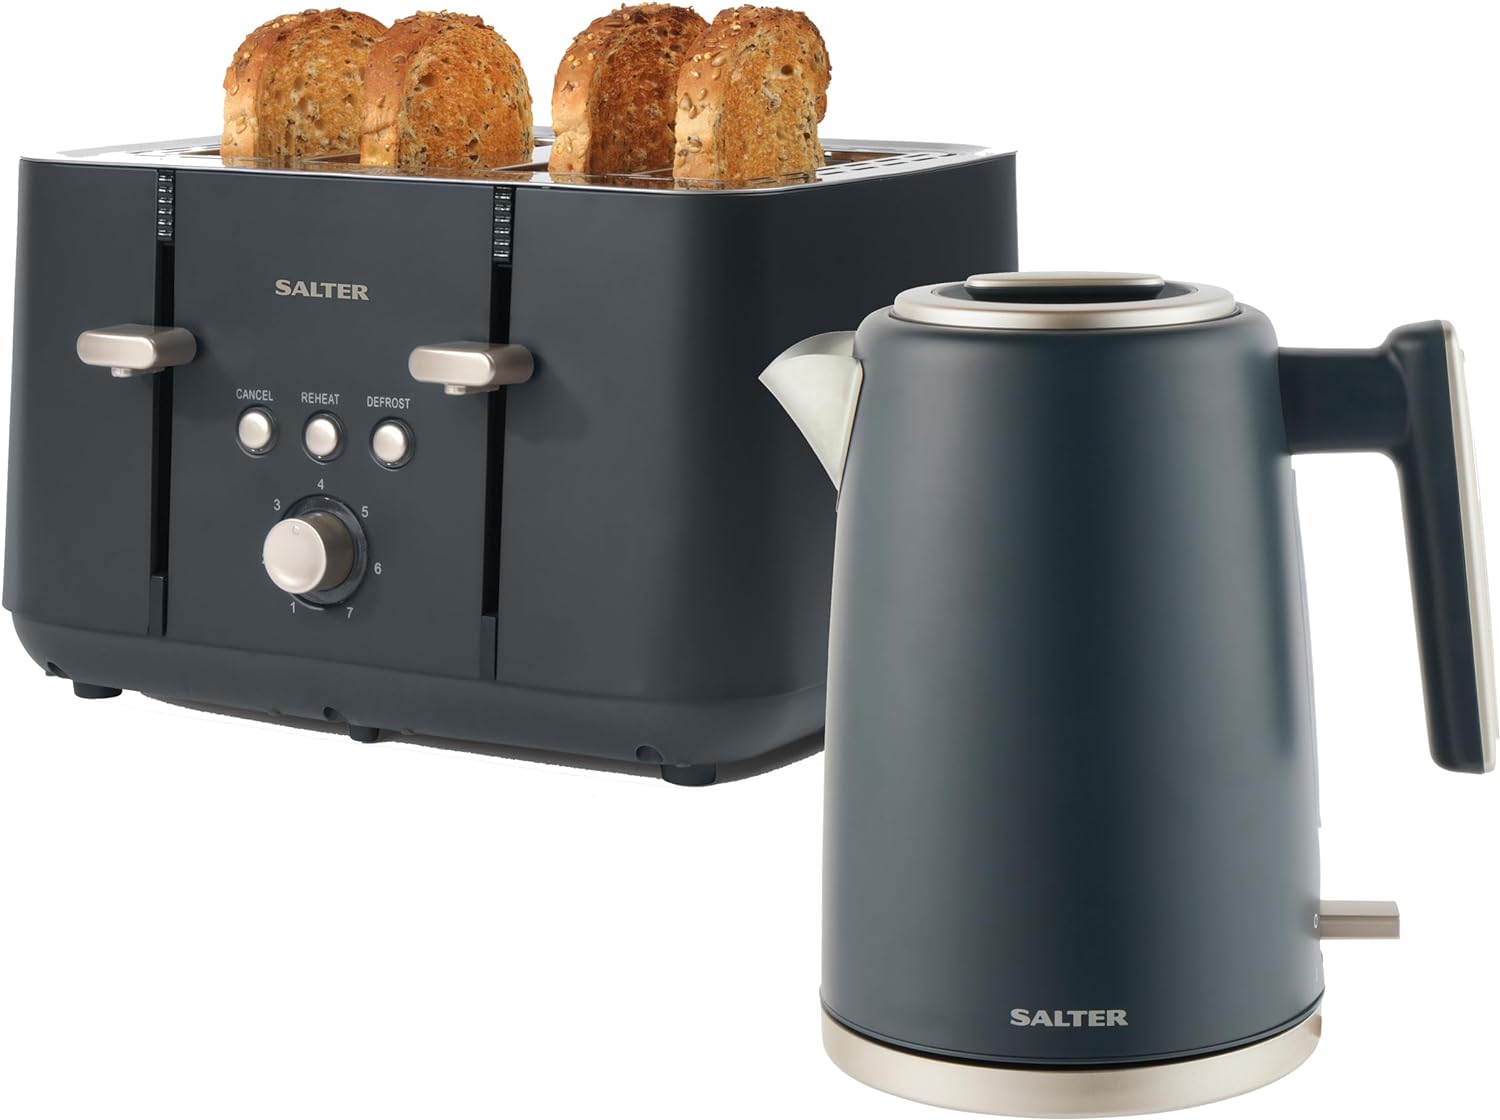 Salter COMBO - 8687 Kettle Toaster Microwave Set – Matching Kitchen Countertop Breakfast Set, Rapid Boil 1.7L 3kW Kettle, 4 - Slice Anti - Jamming Toaster, 20L 800W Manual Dial Microwave, Marino, Blue Grey - Amazing Gadgets Outlet